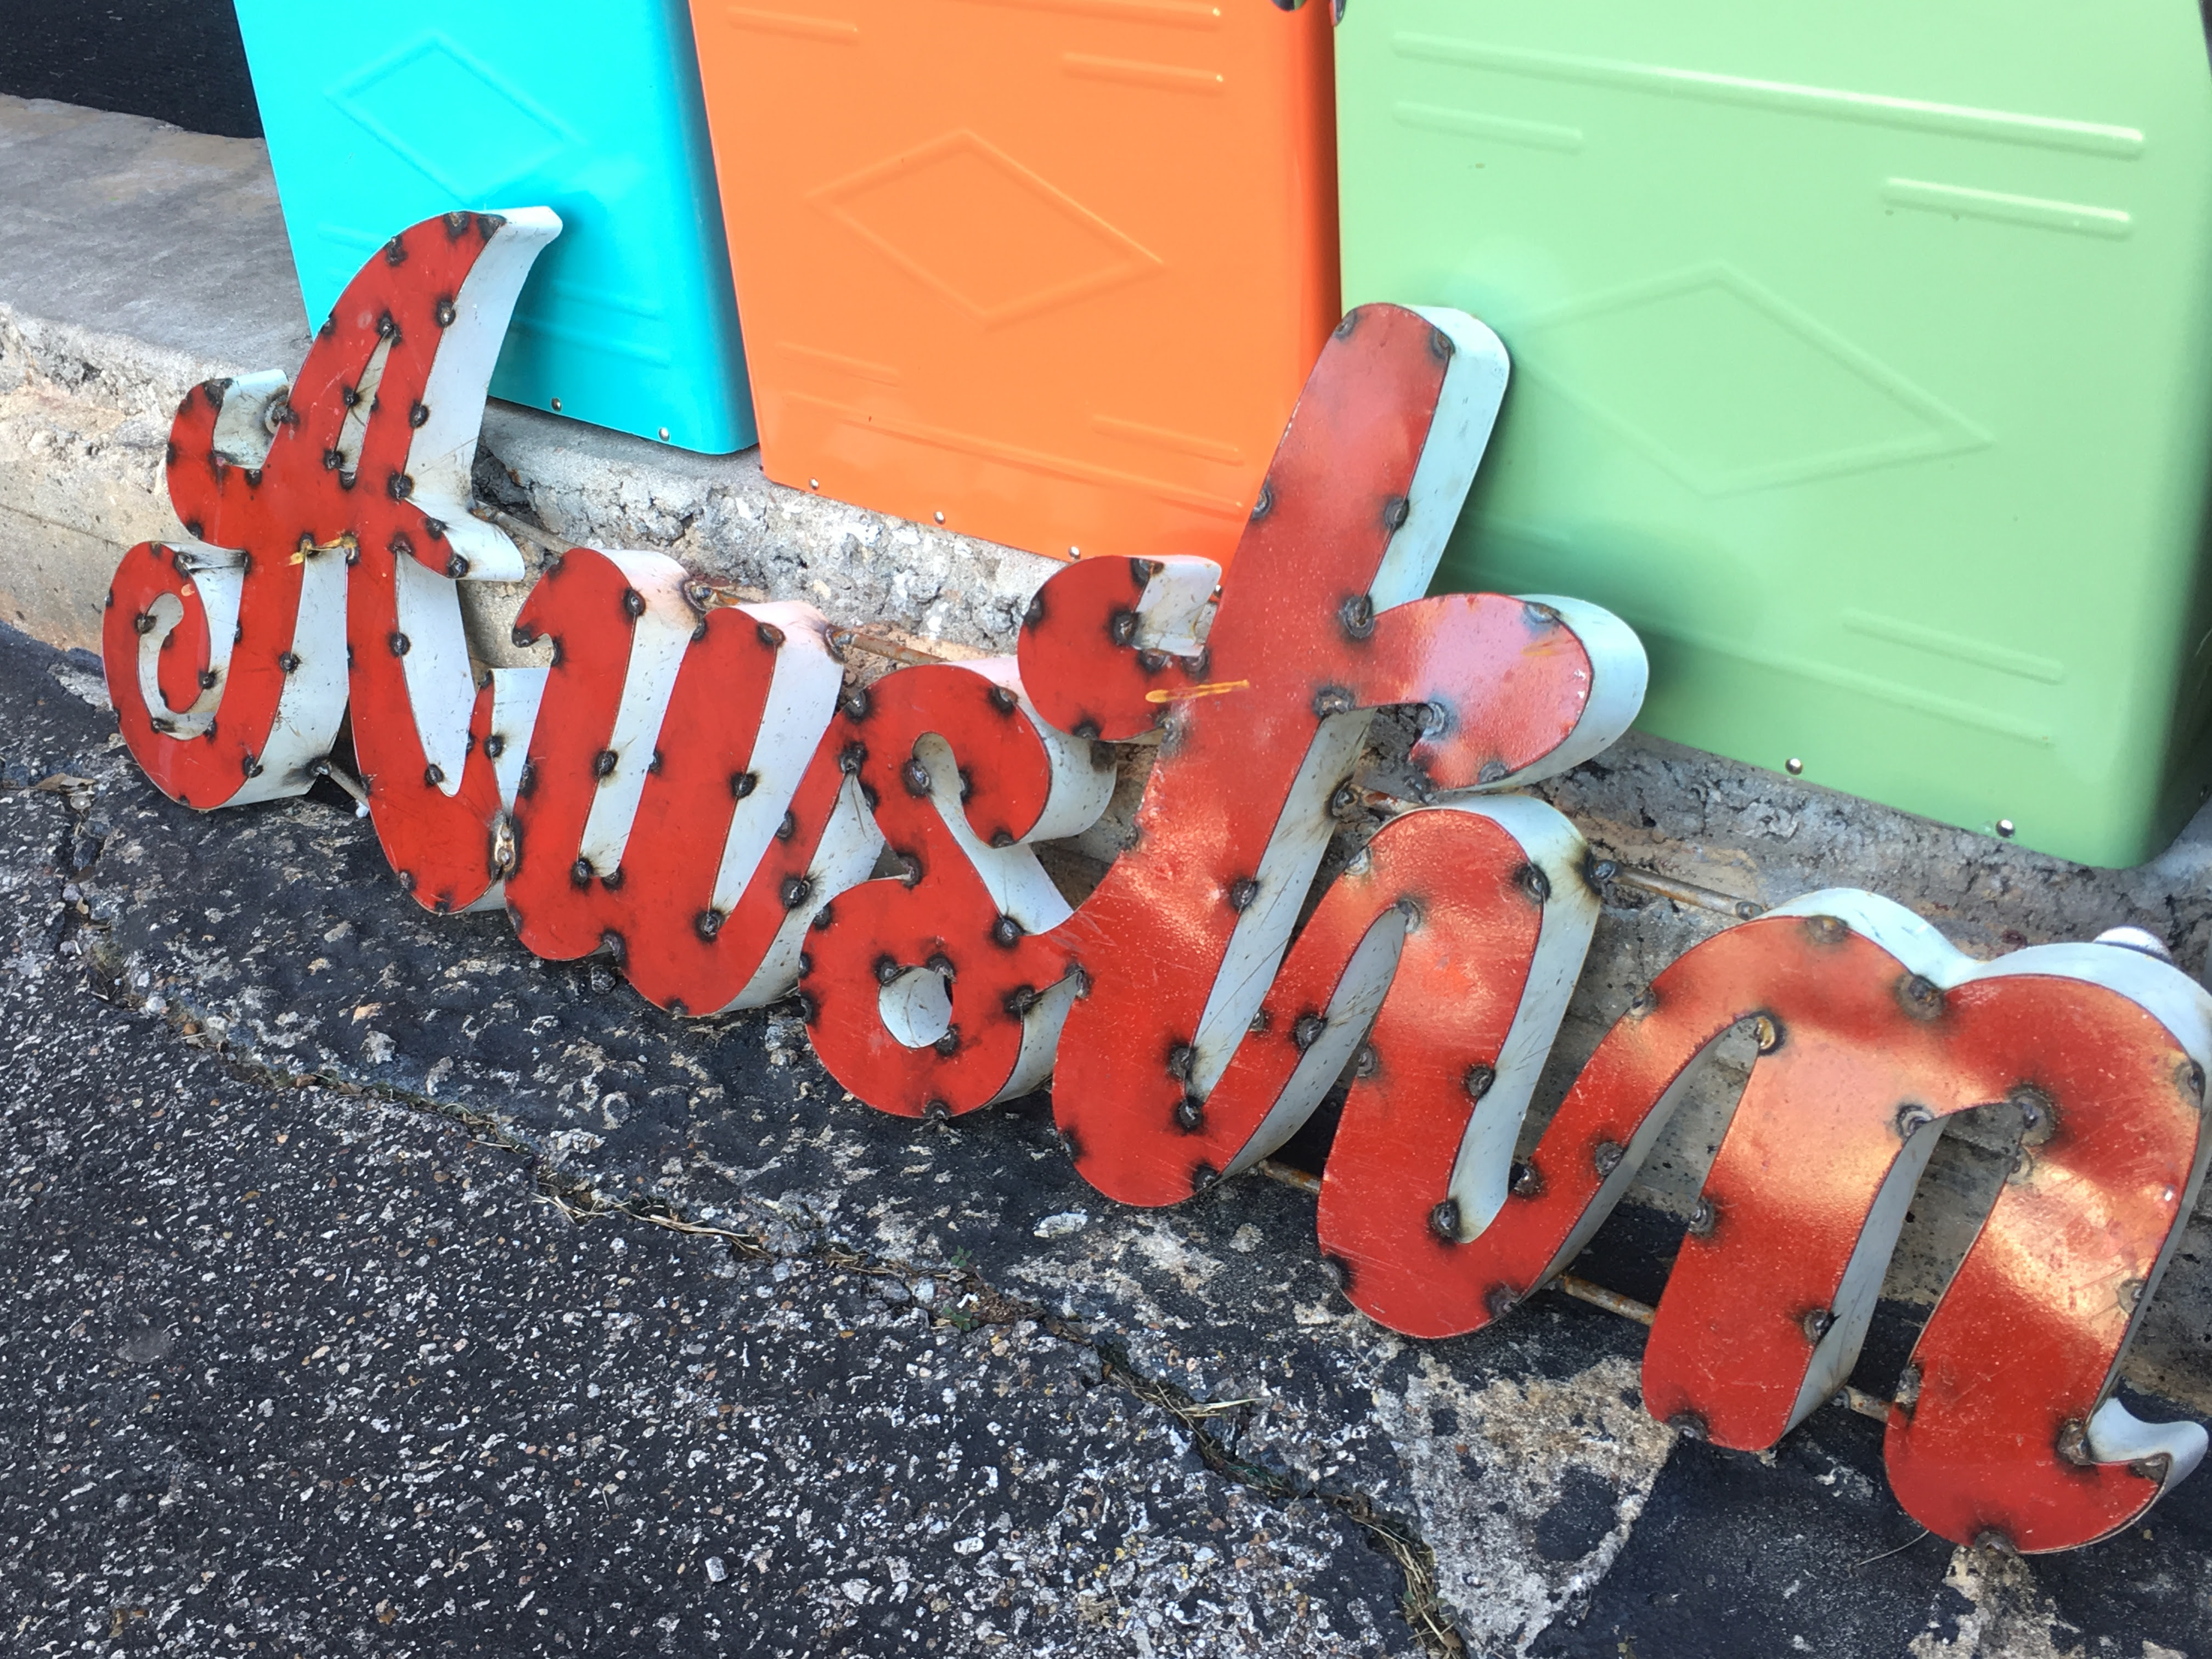 Red metal “Austin” sign with bright colors in background